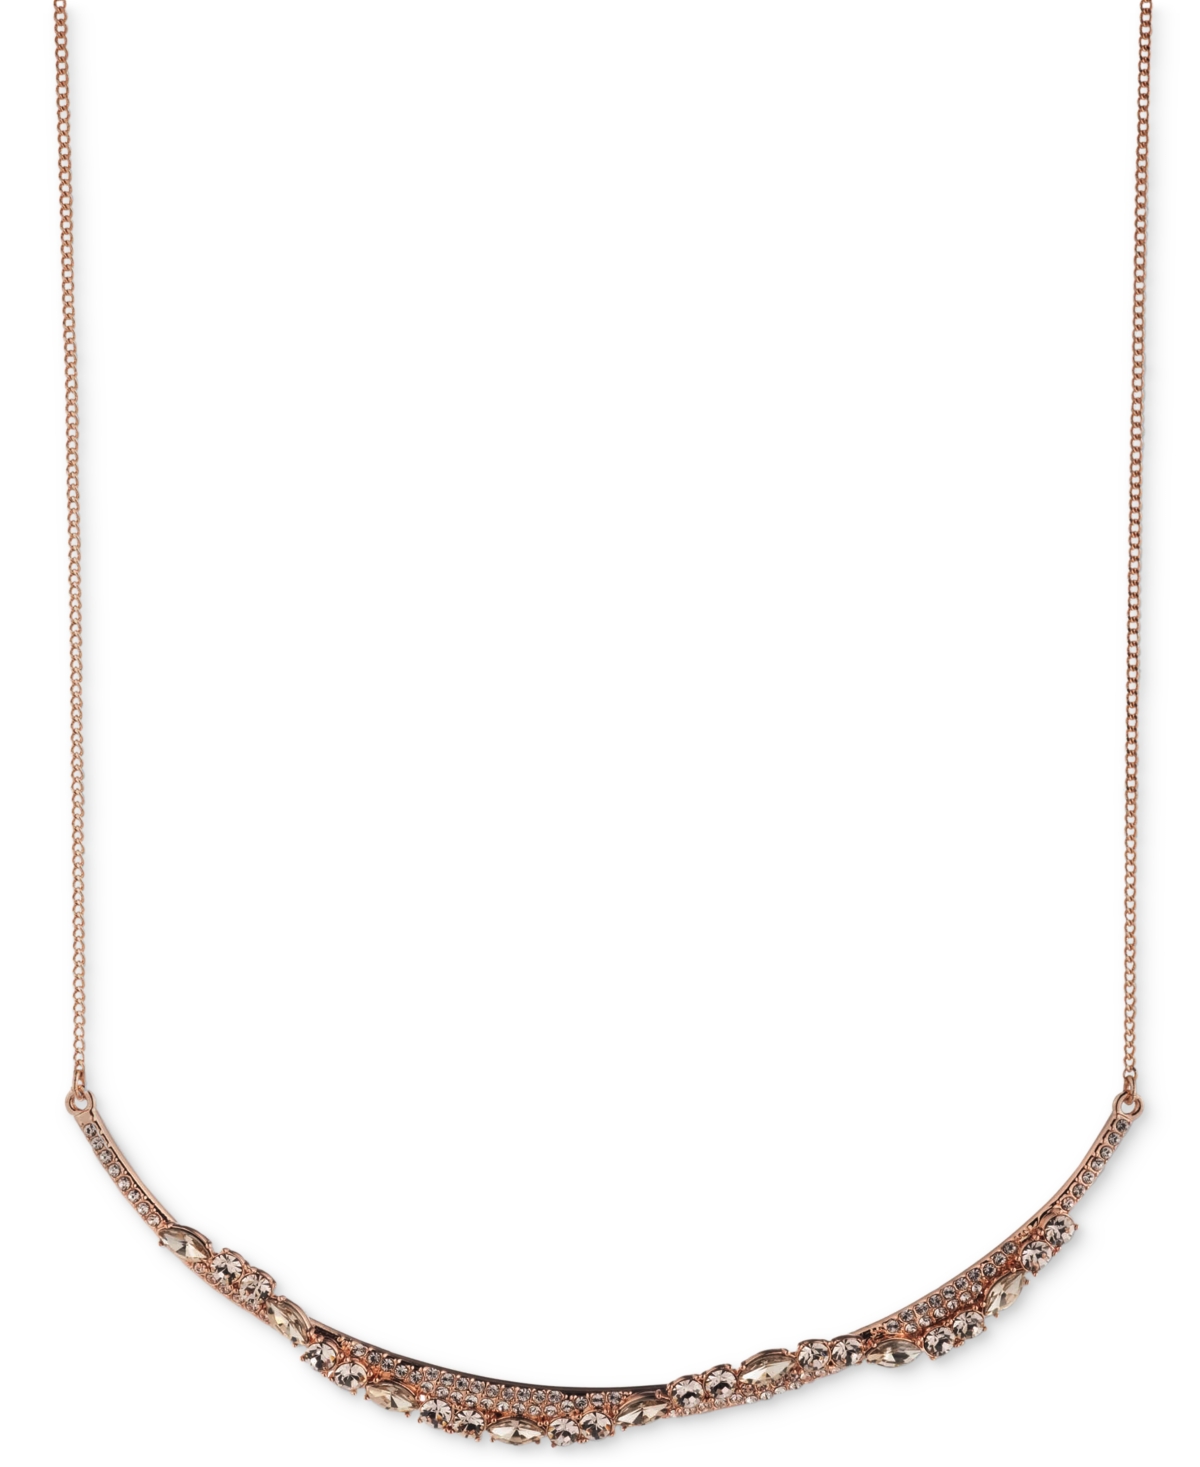 Givenchy Crystal Pave Frontal Necklace, 16" + 3" Extender In Rose Gold